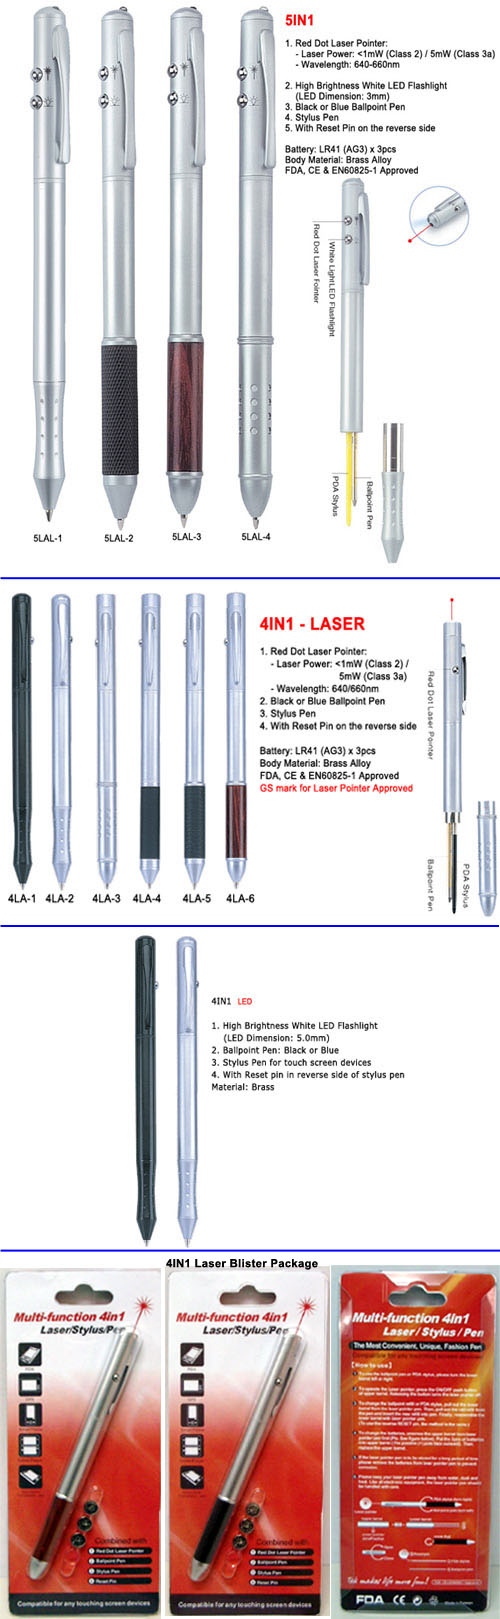 Multifunction Stylus Pen: Laser and LED Series 5IN1 / 4IN1